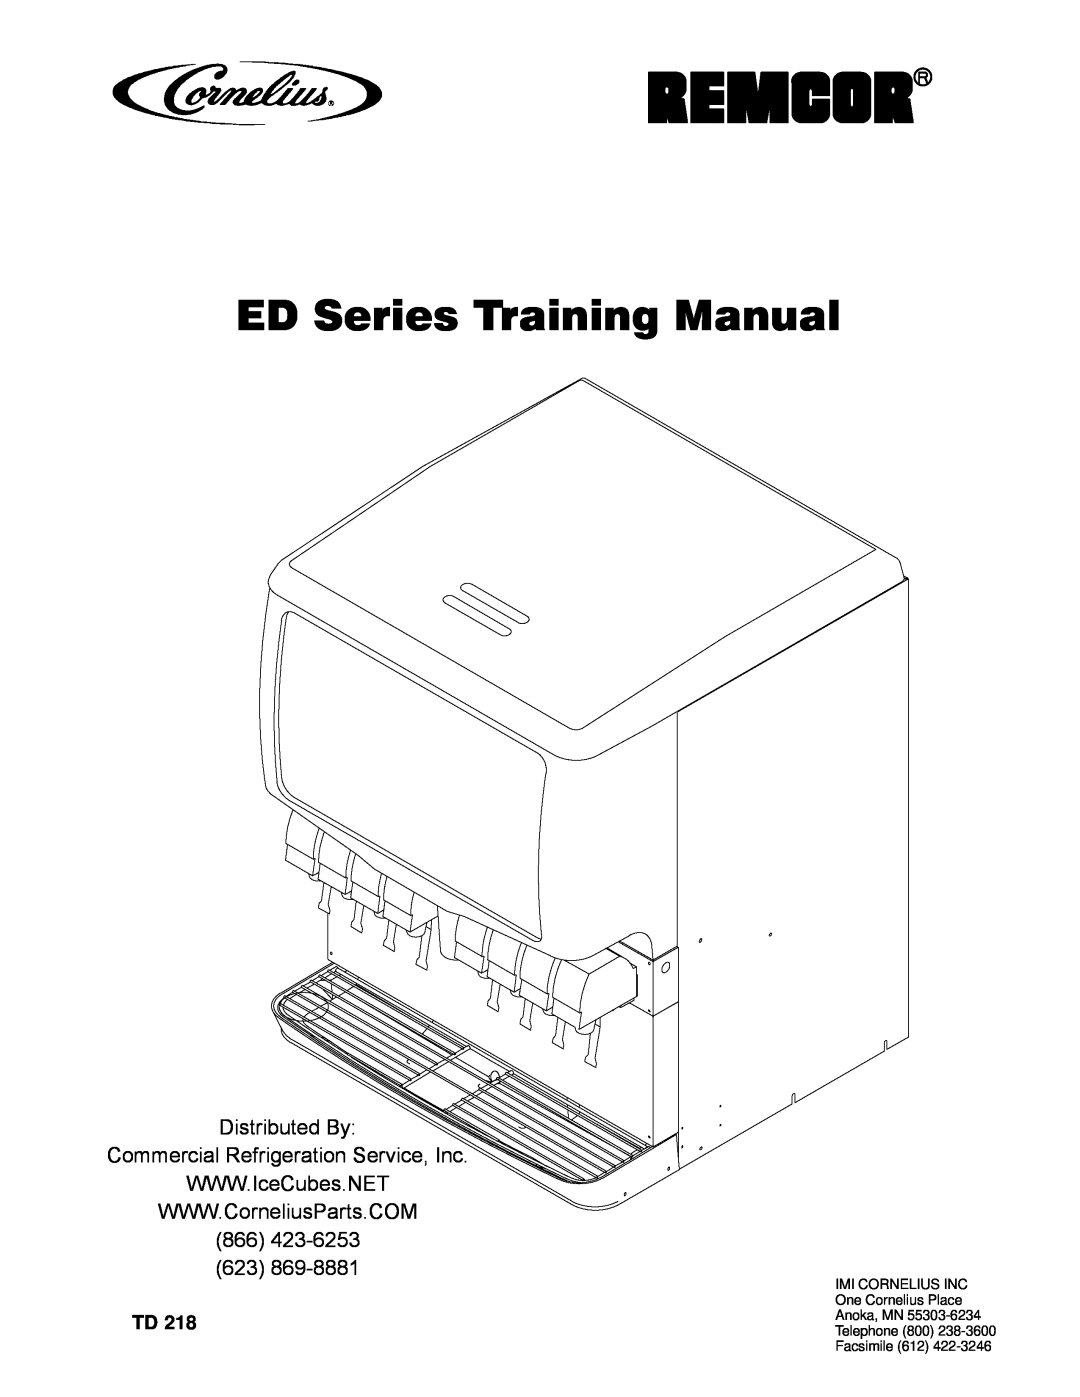 Cornelius manual Distributed By, Commercial Refrigeration Service, Inc, 866423-6253, ED Series Training Manual 